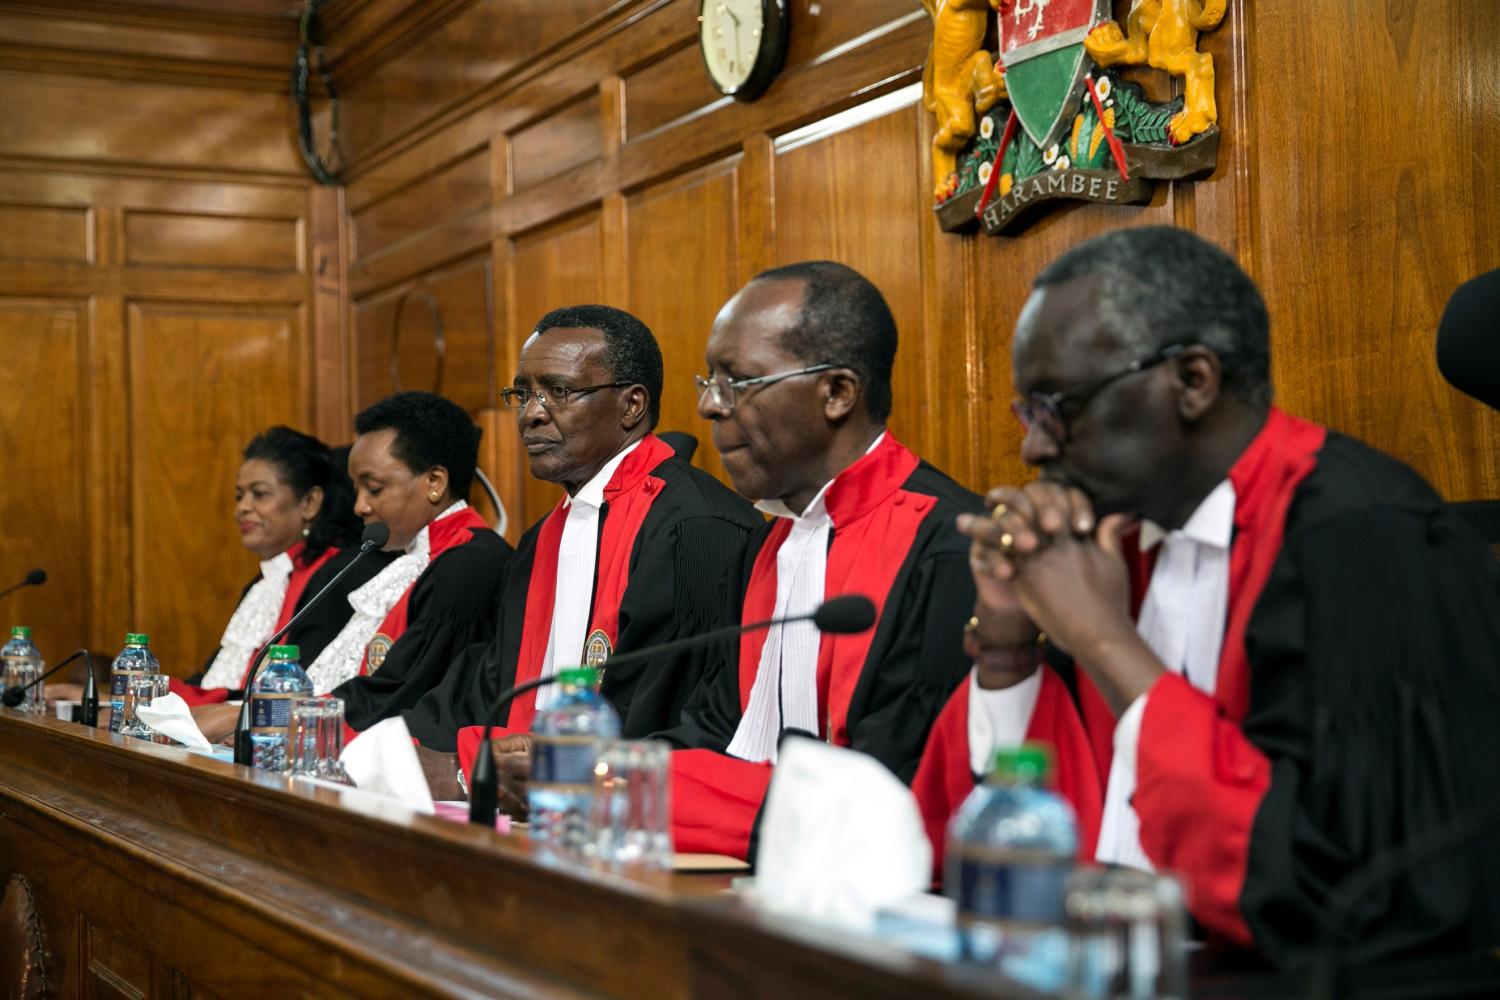 Kenya's Supreme Court judges preside before delivering a detailed ruling laying out their reasons for annulling last month's presidential election in Kenya's Supreme Court in Nairobi, Kenya September 20, 2017. REUTERS/Baz Ratner - RC1EC0C85570